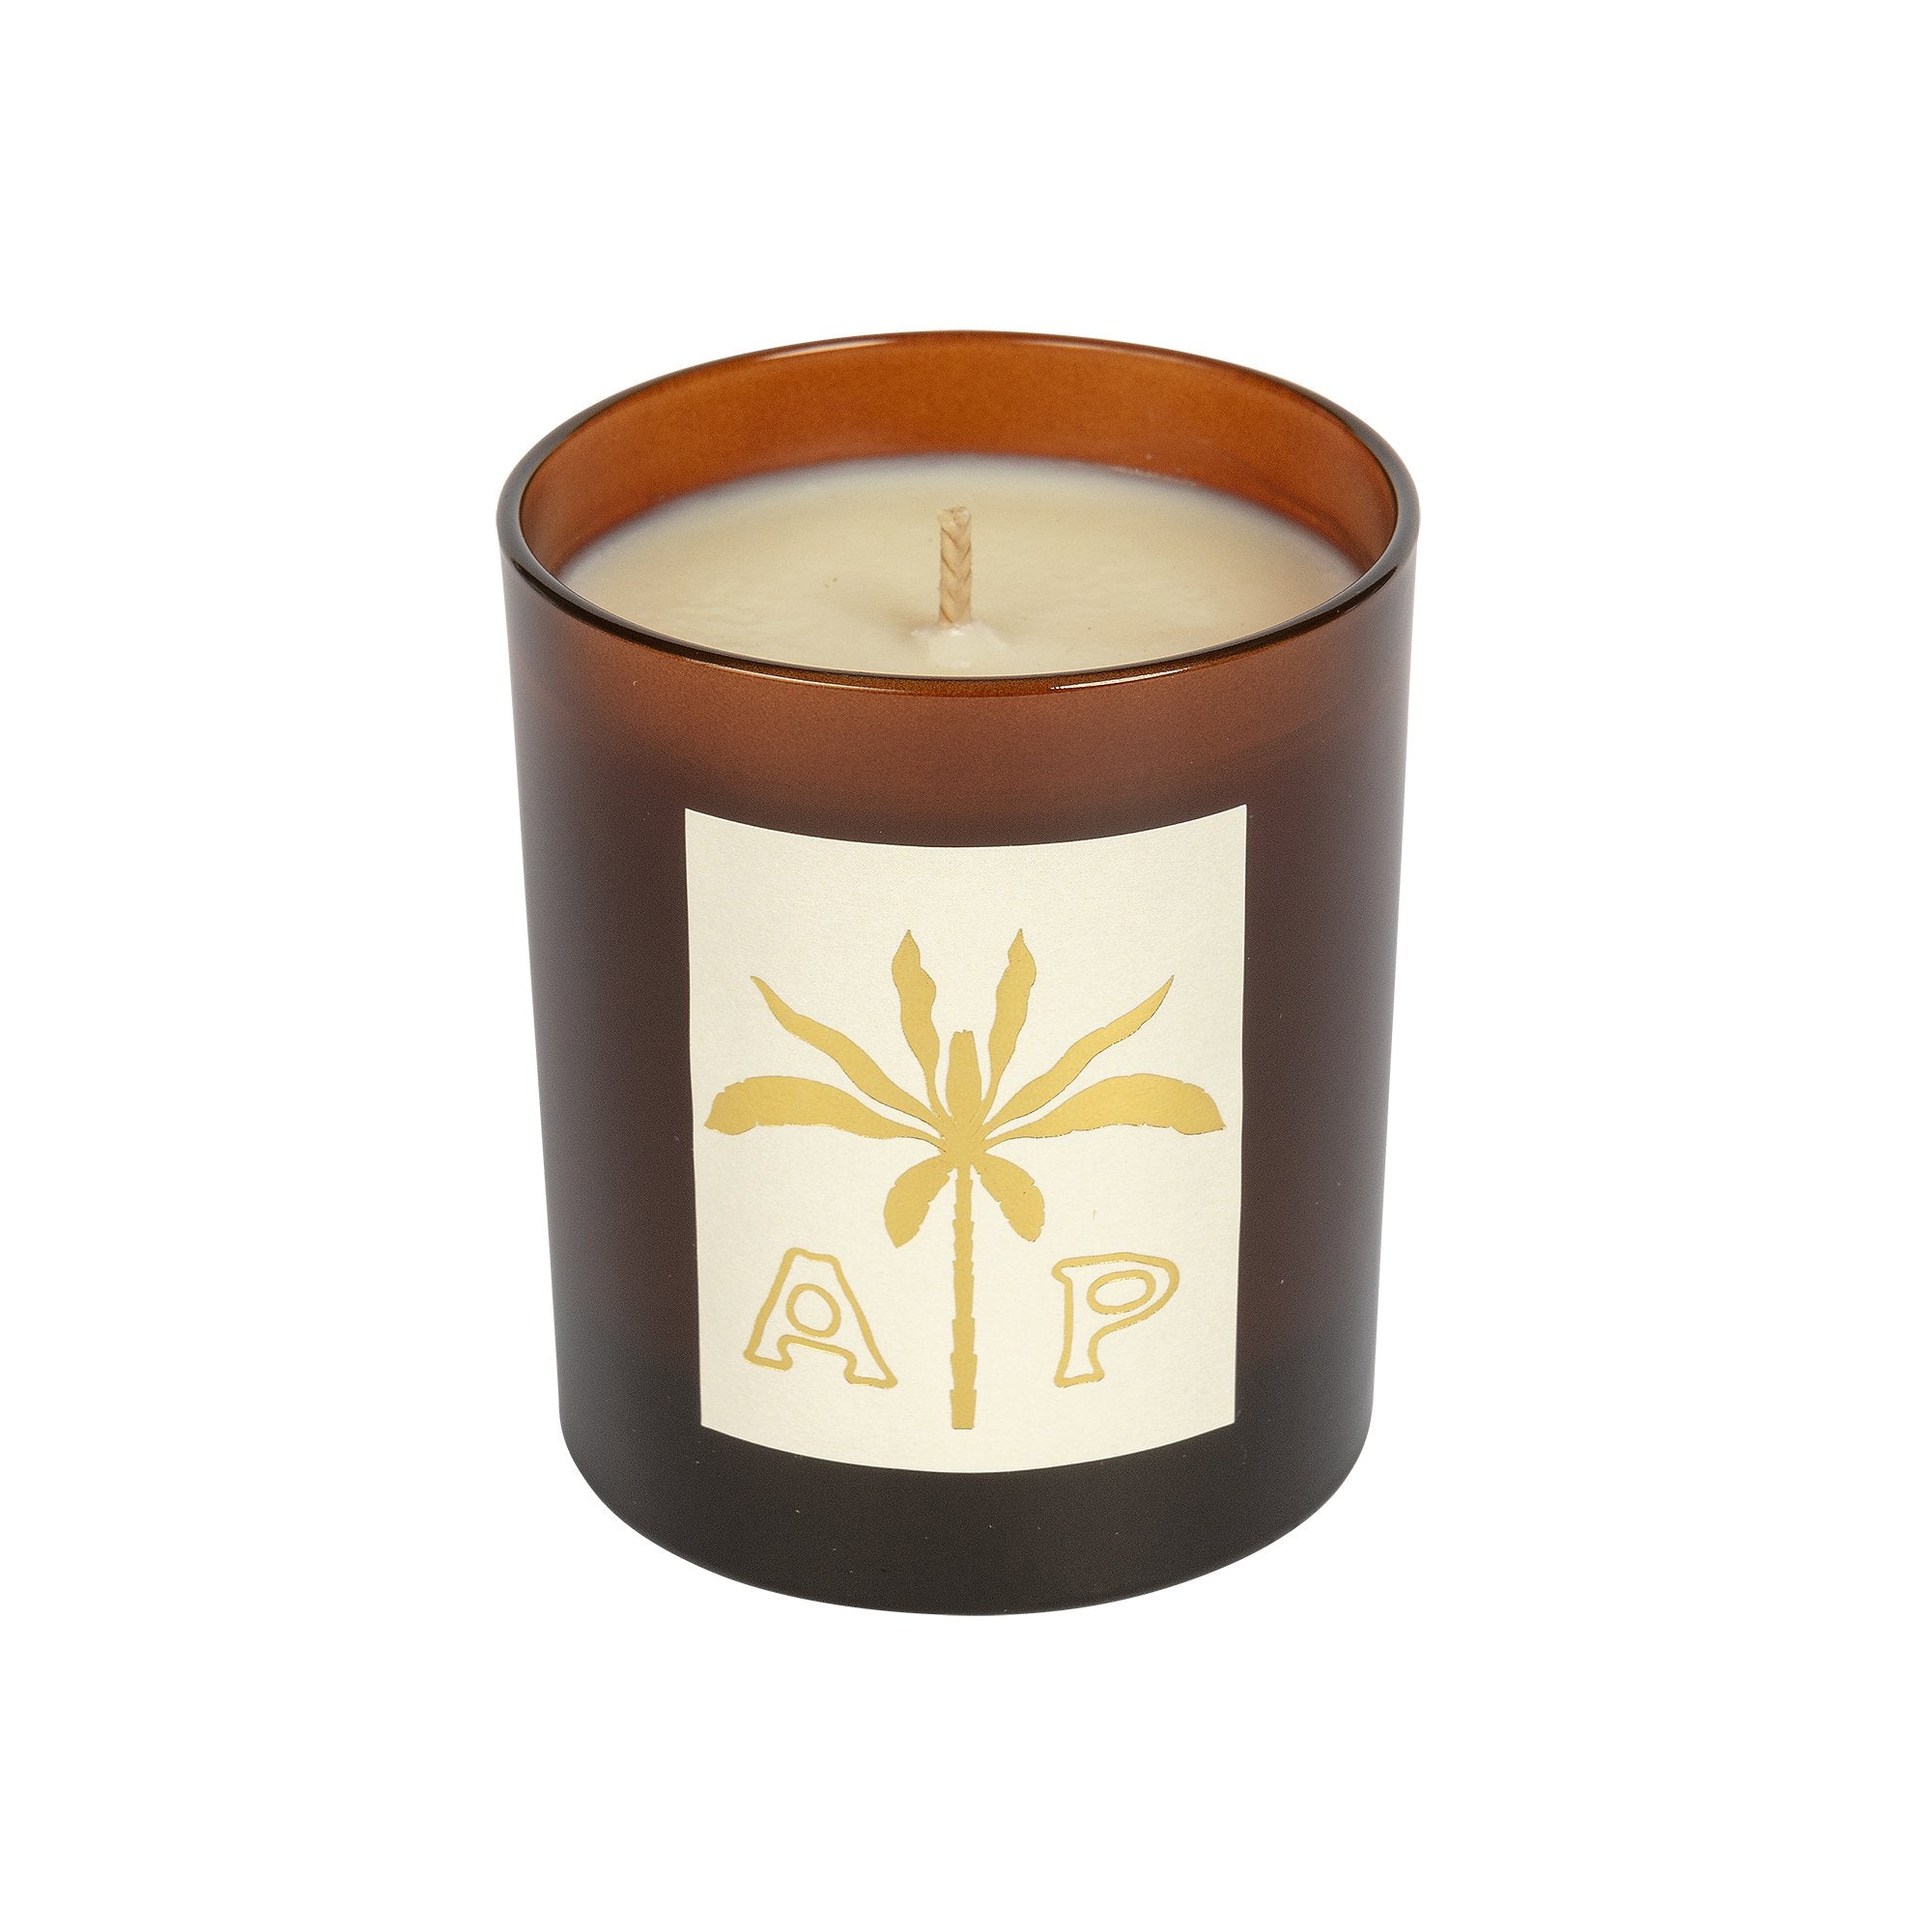 Wood Fire & Pine Candle - Alice Palmer & Co